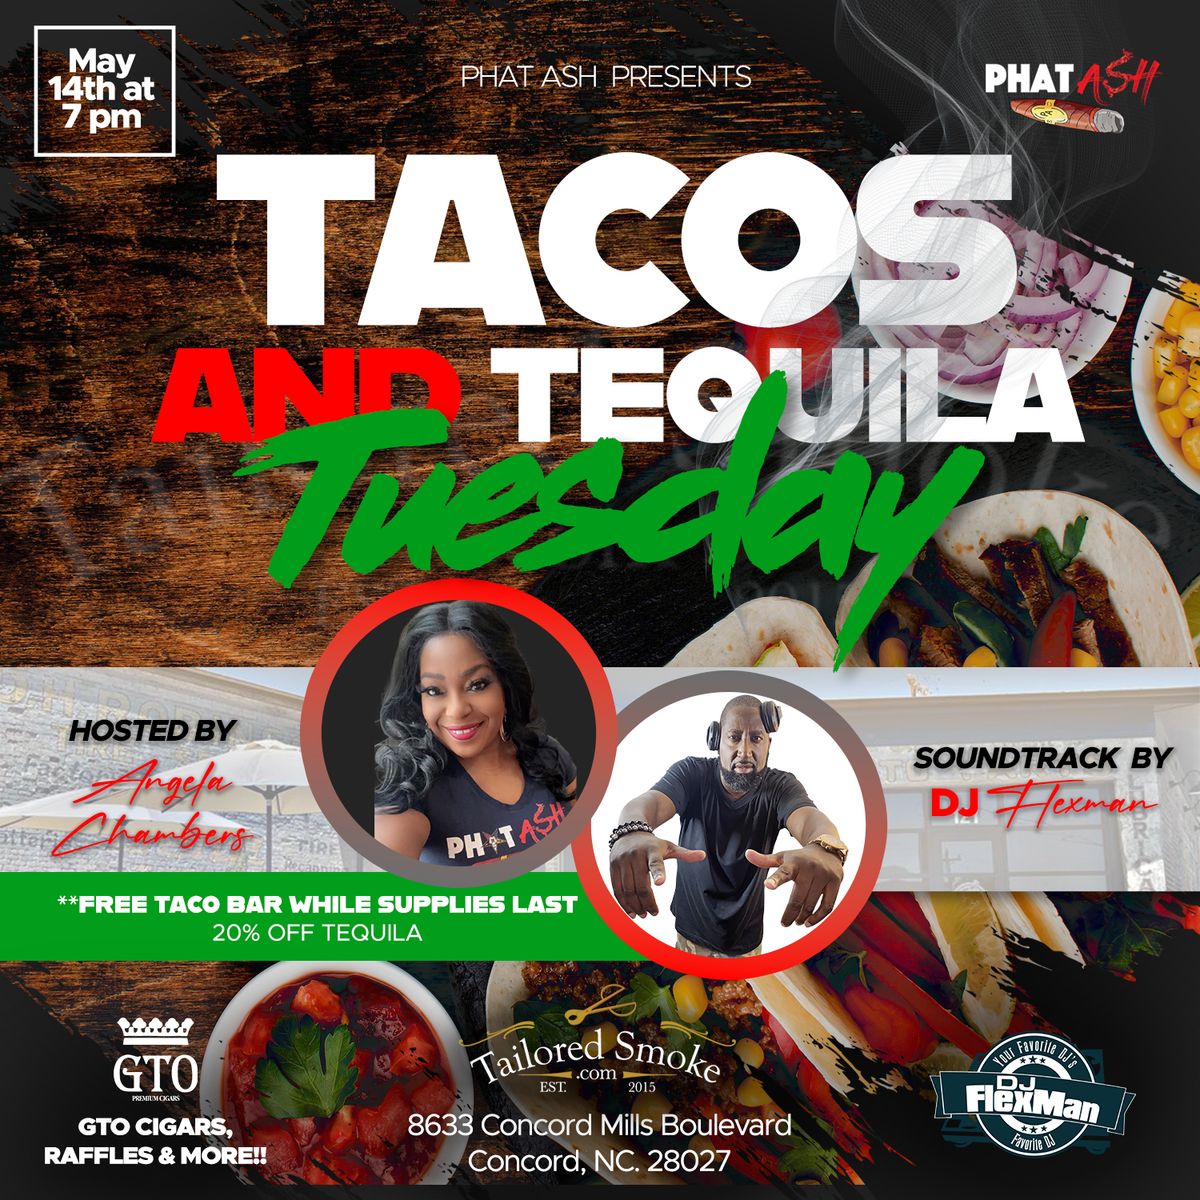 Phat Ash Presents Tacos and Tequila Tuesday